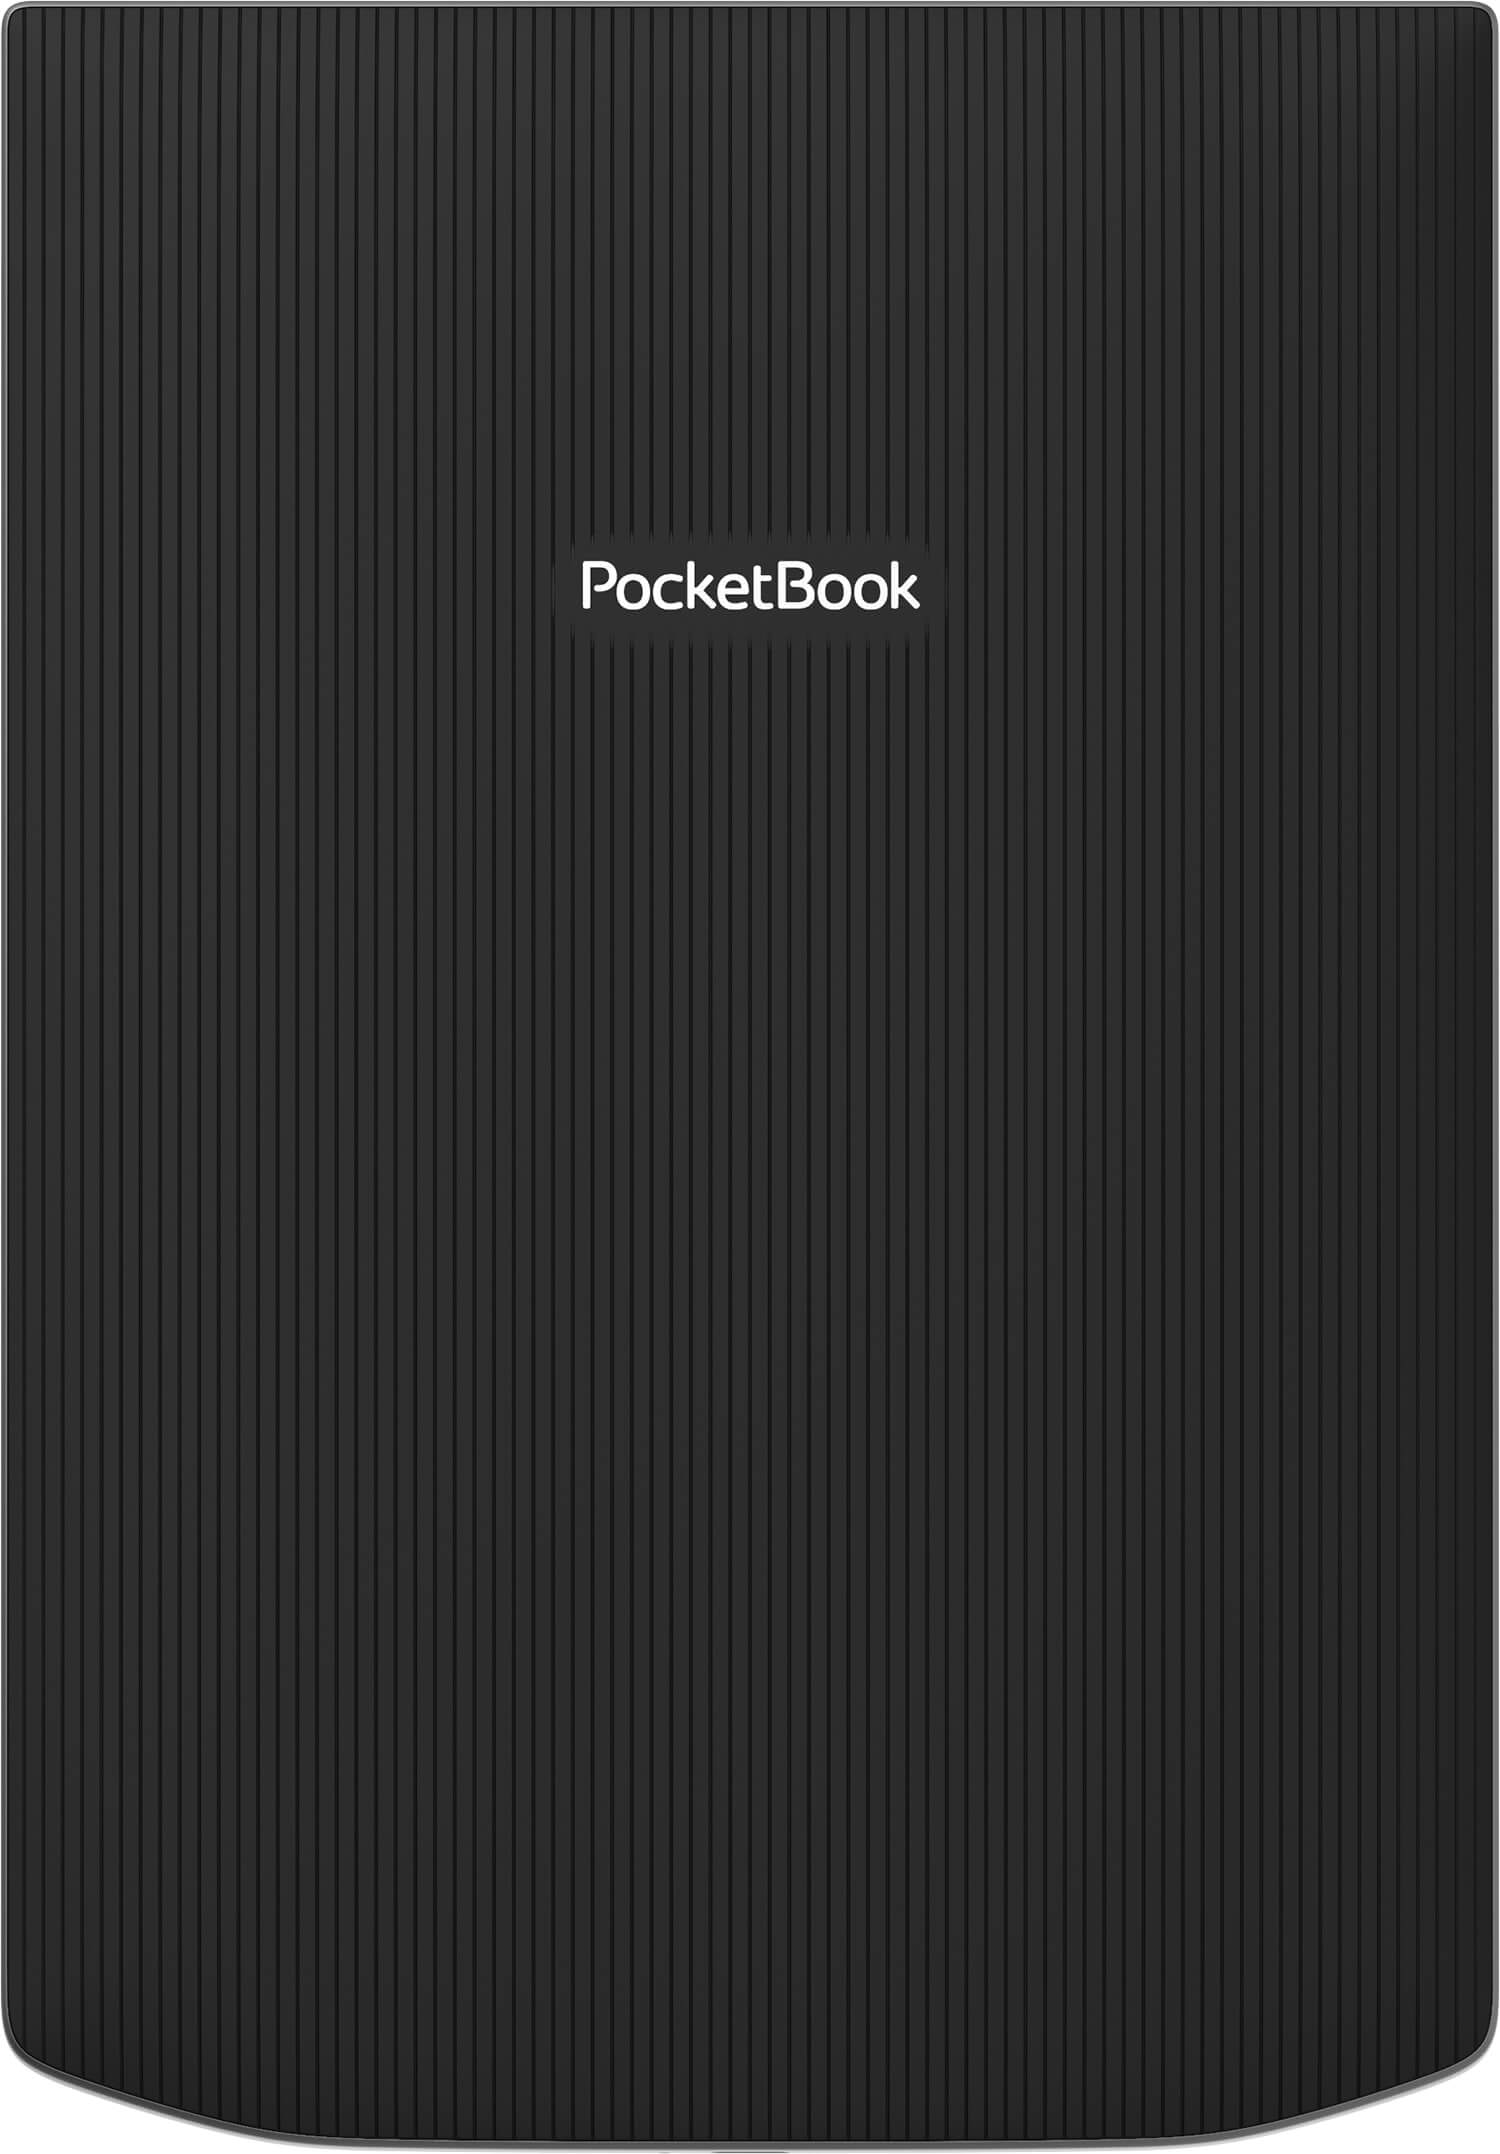 Pocketbook InkPad X Pro - 10.3-inch e-note with free stylus and case